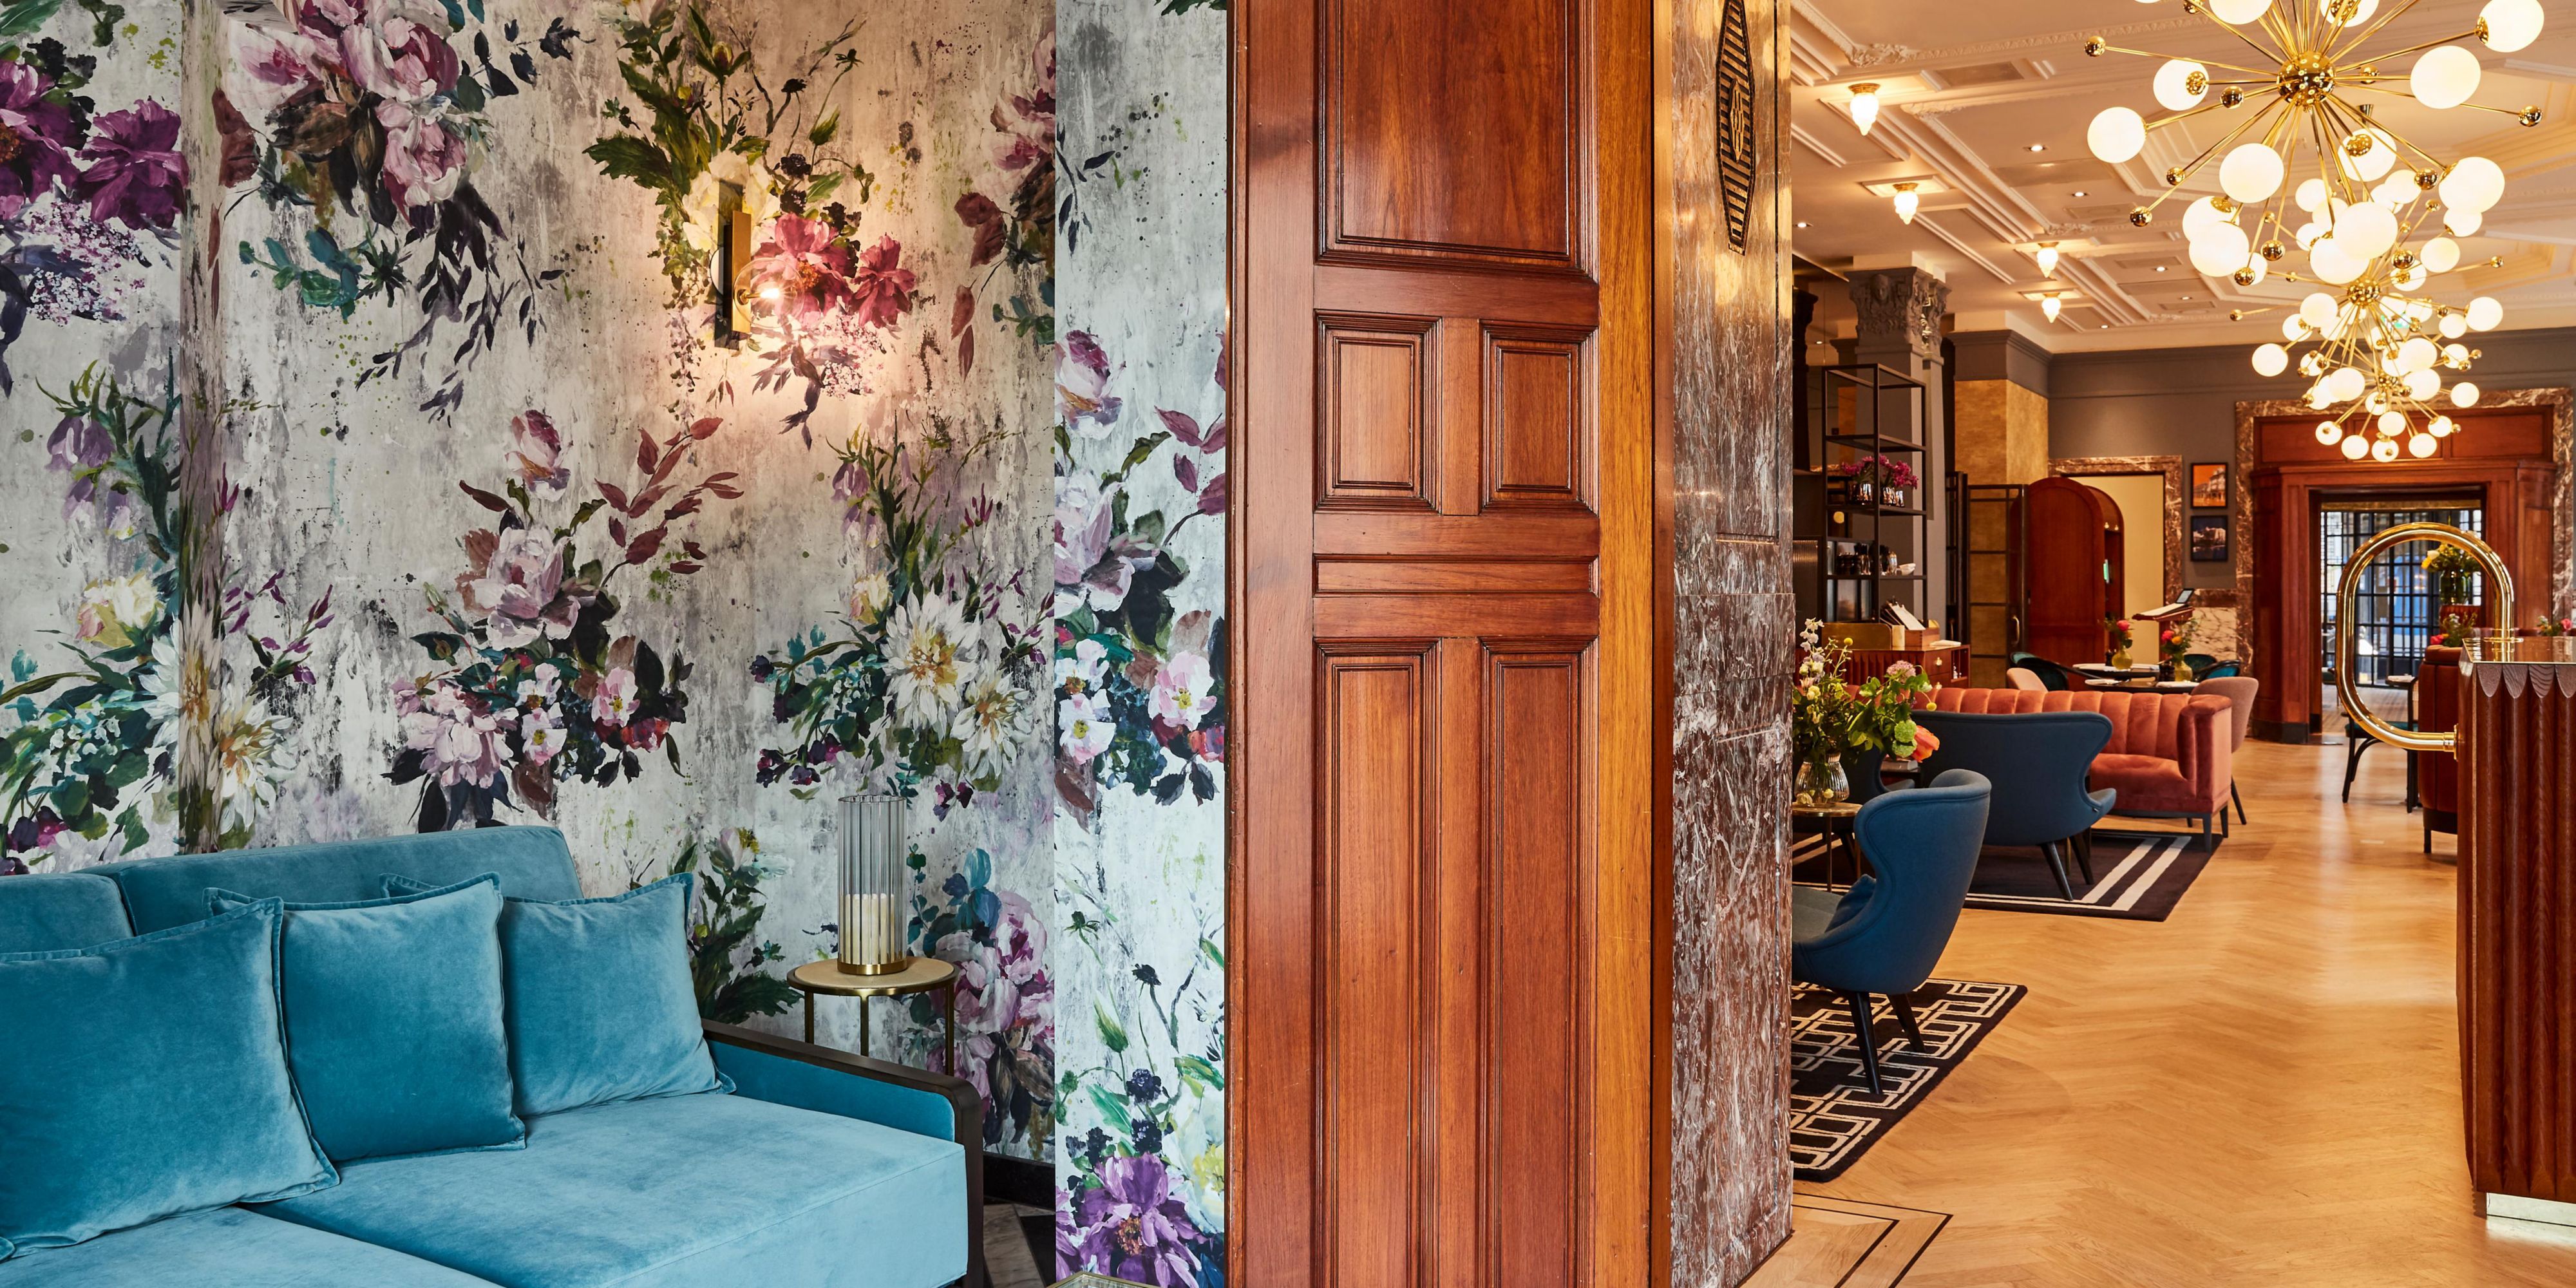 Floral wallpaper references the classic Dutch tulips